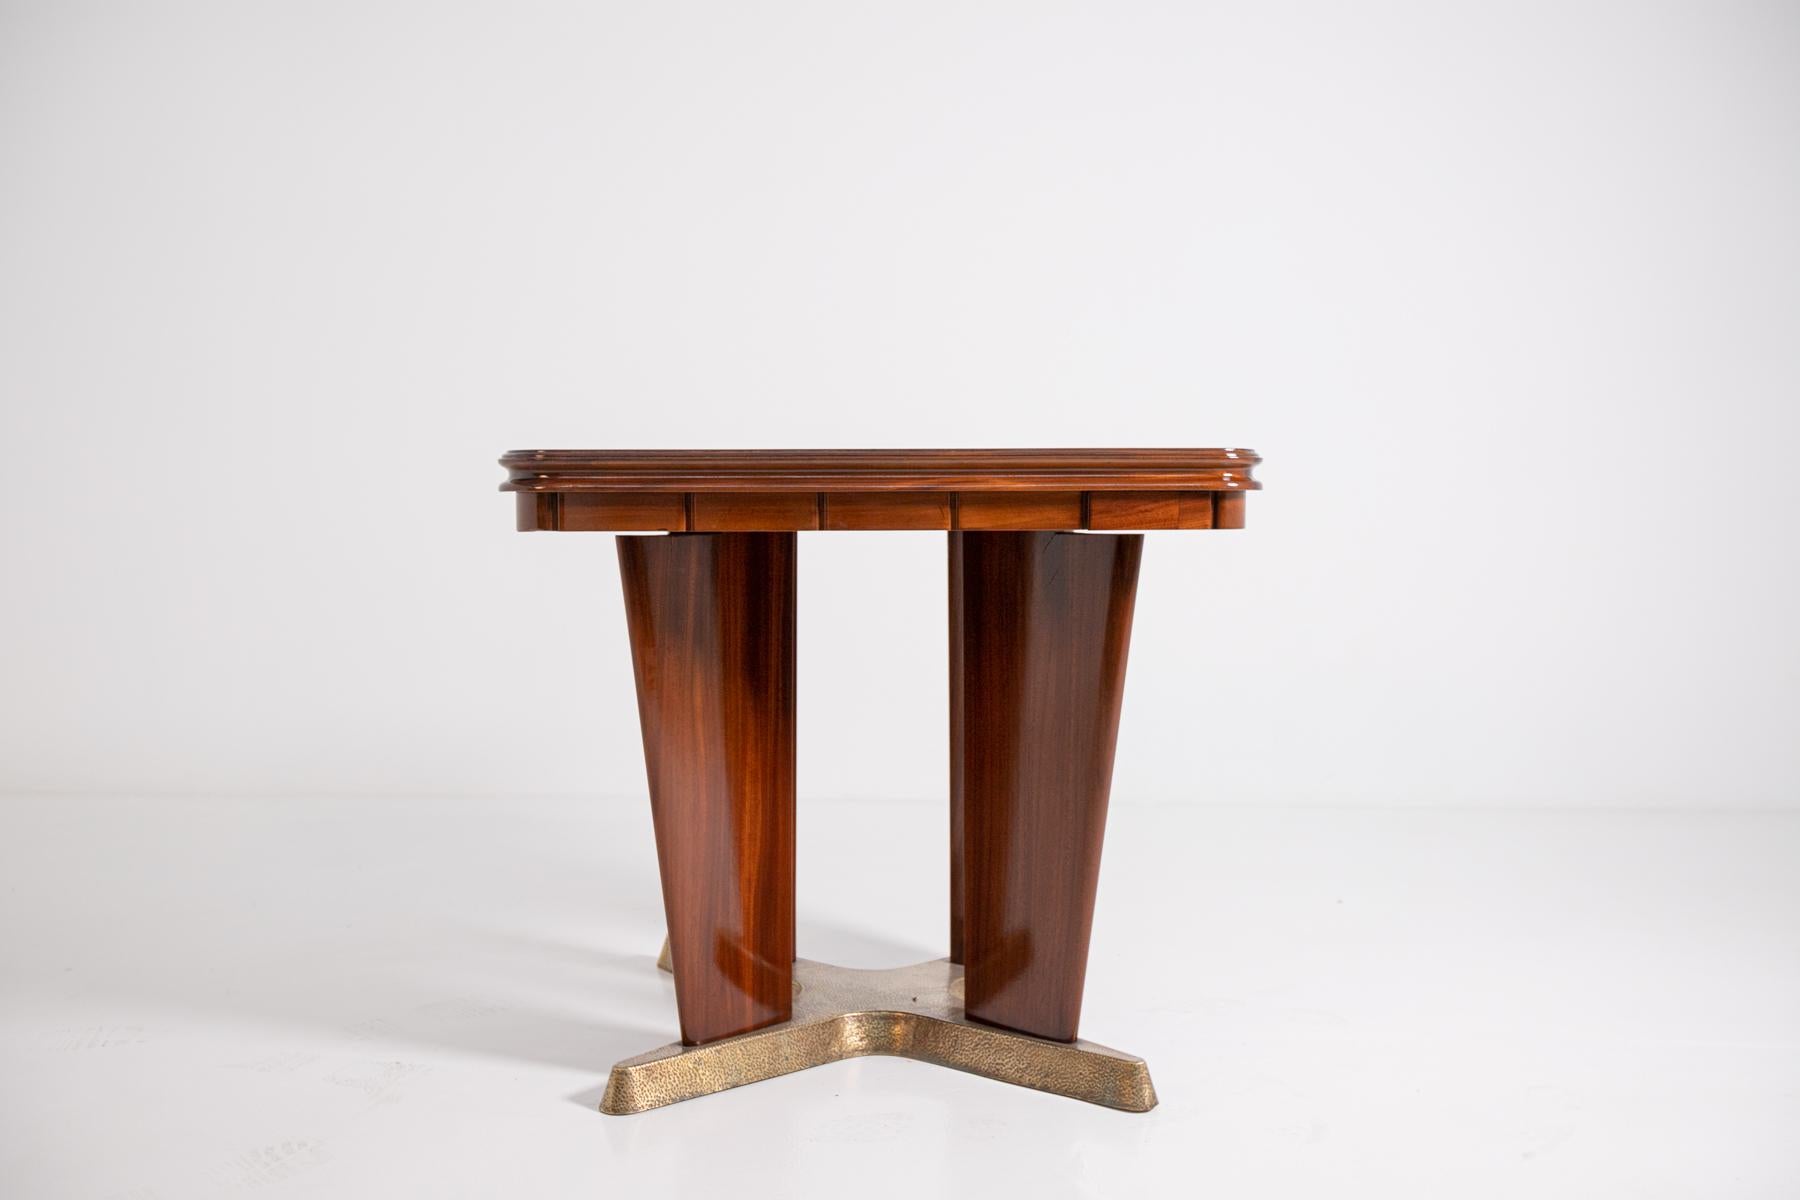 Elegant and refined game table by Giorgio Ramponi from 1950. The table is made of walnut wood and brass. The game table comes from a private Bolognese house. The game table has several peculiarities, one of which is its brass base worked by hand.